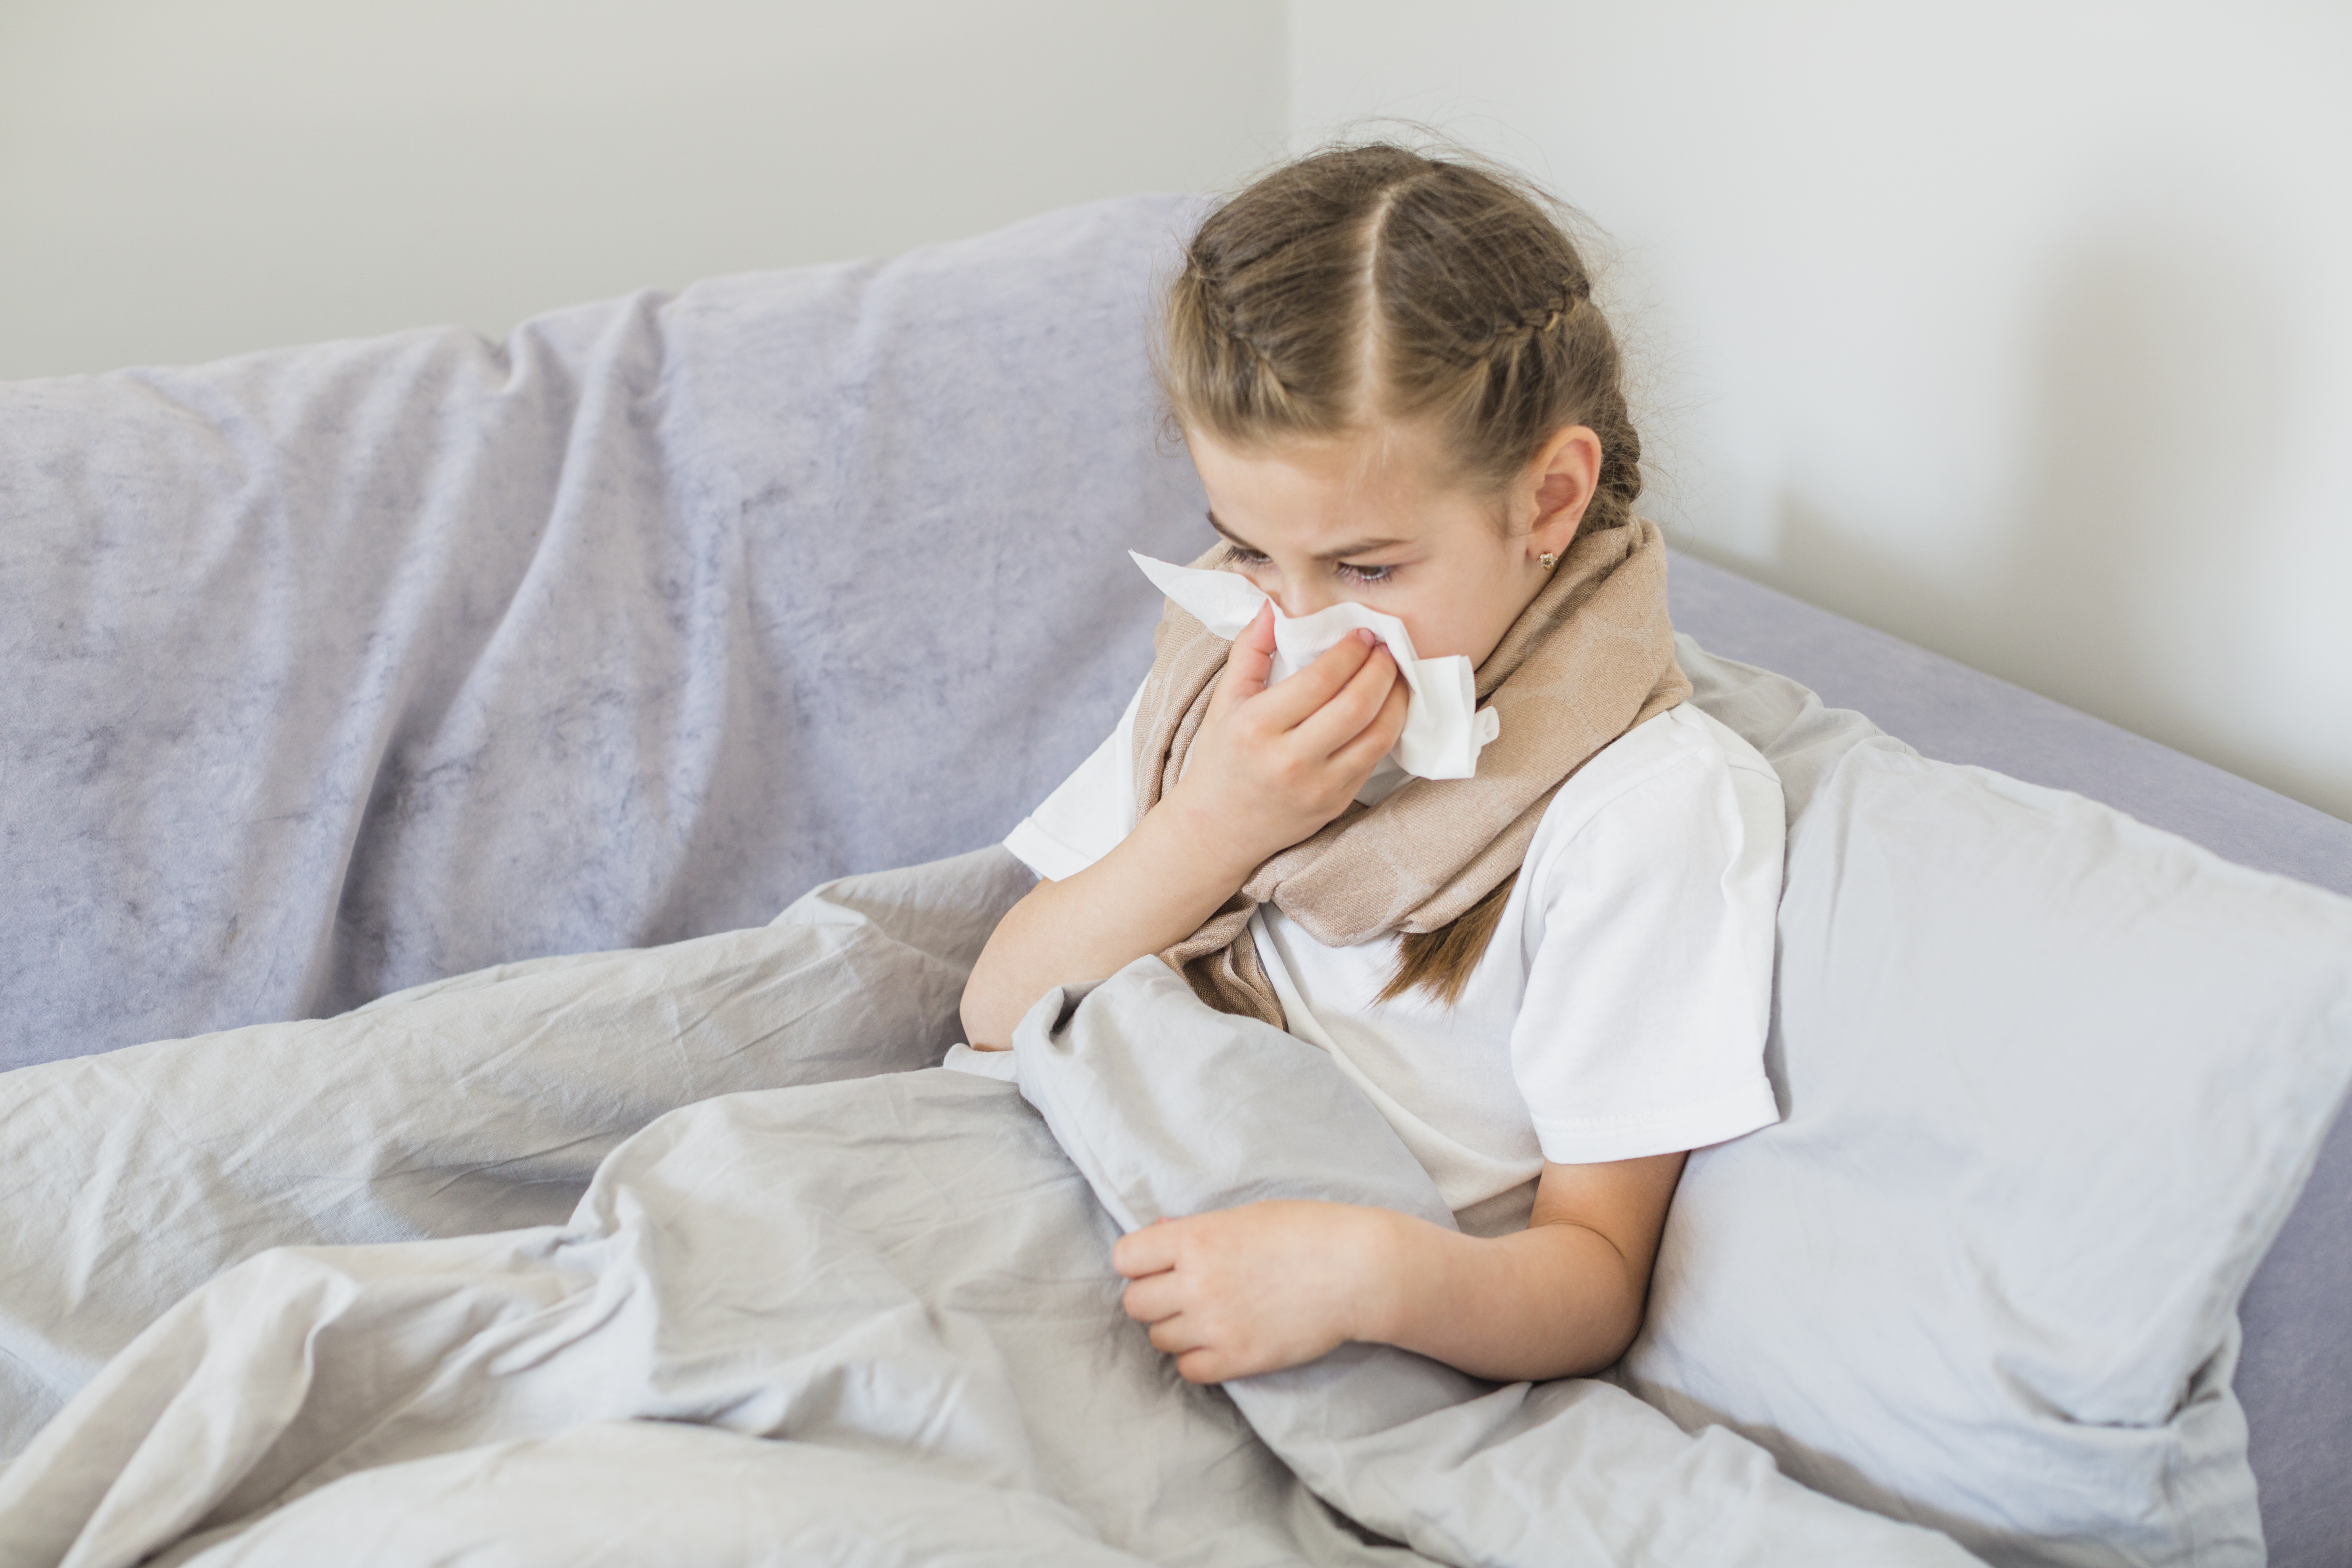 Tips for Soothing a Coughing or Feverish Infant or Toddler at Home